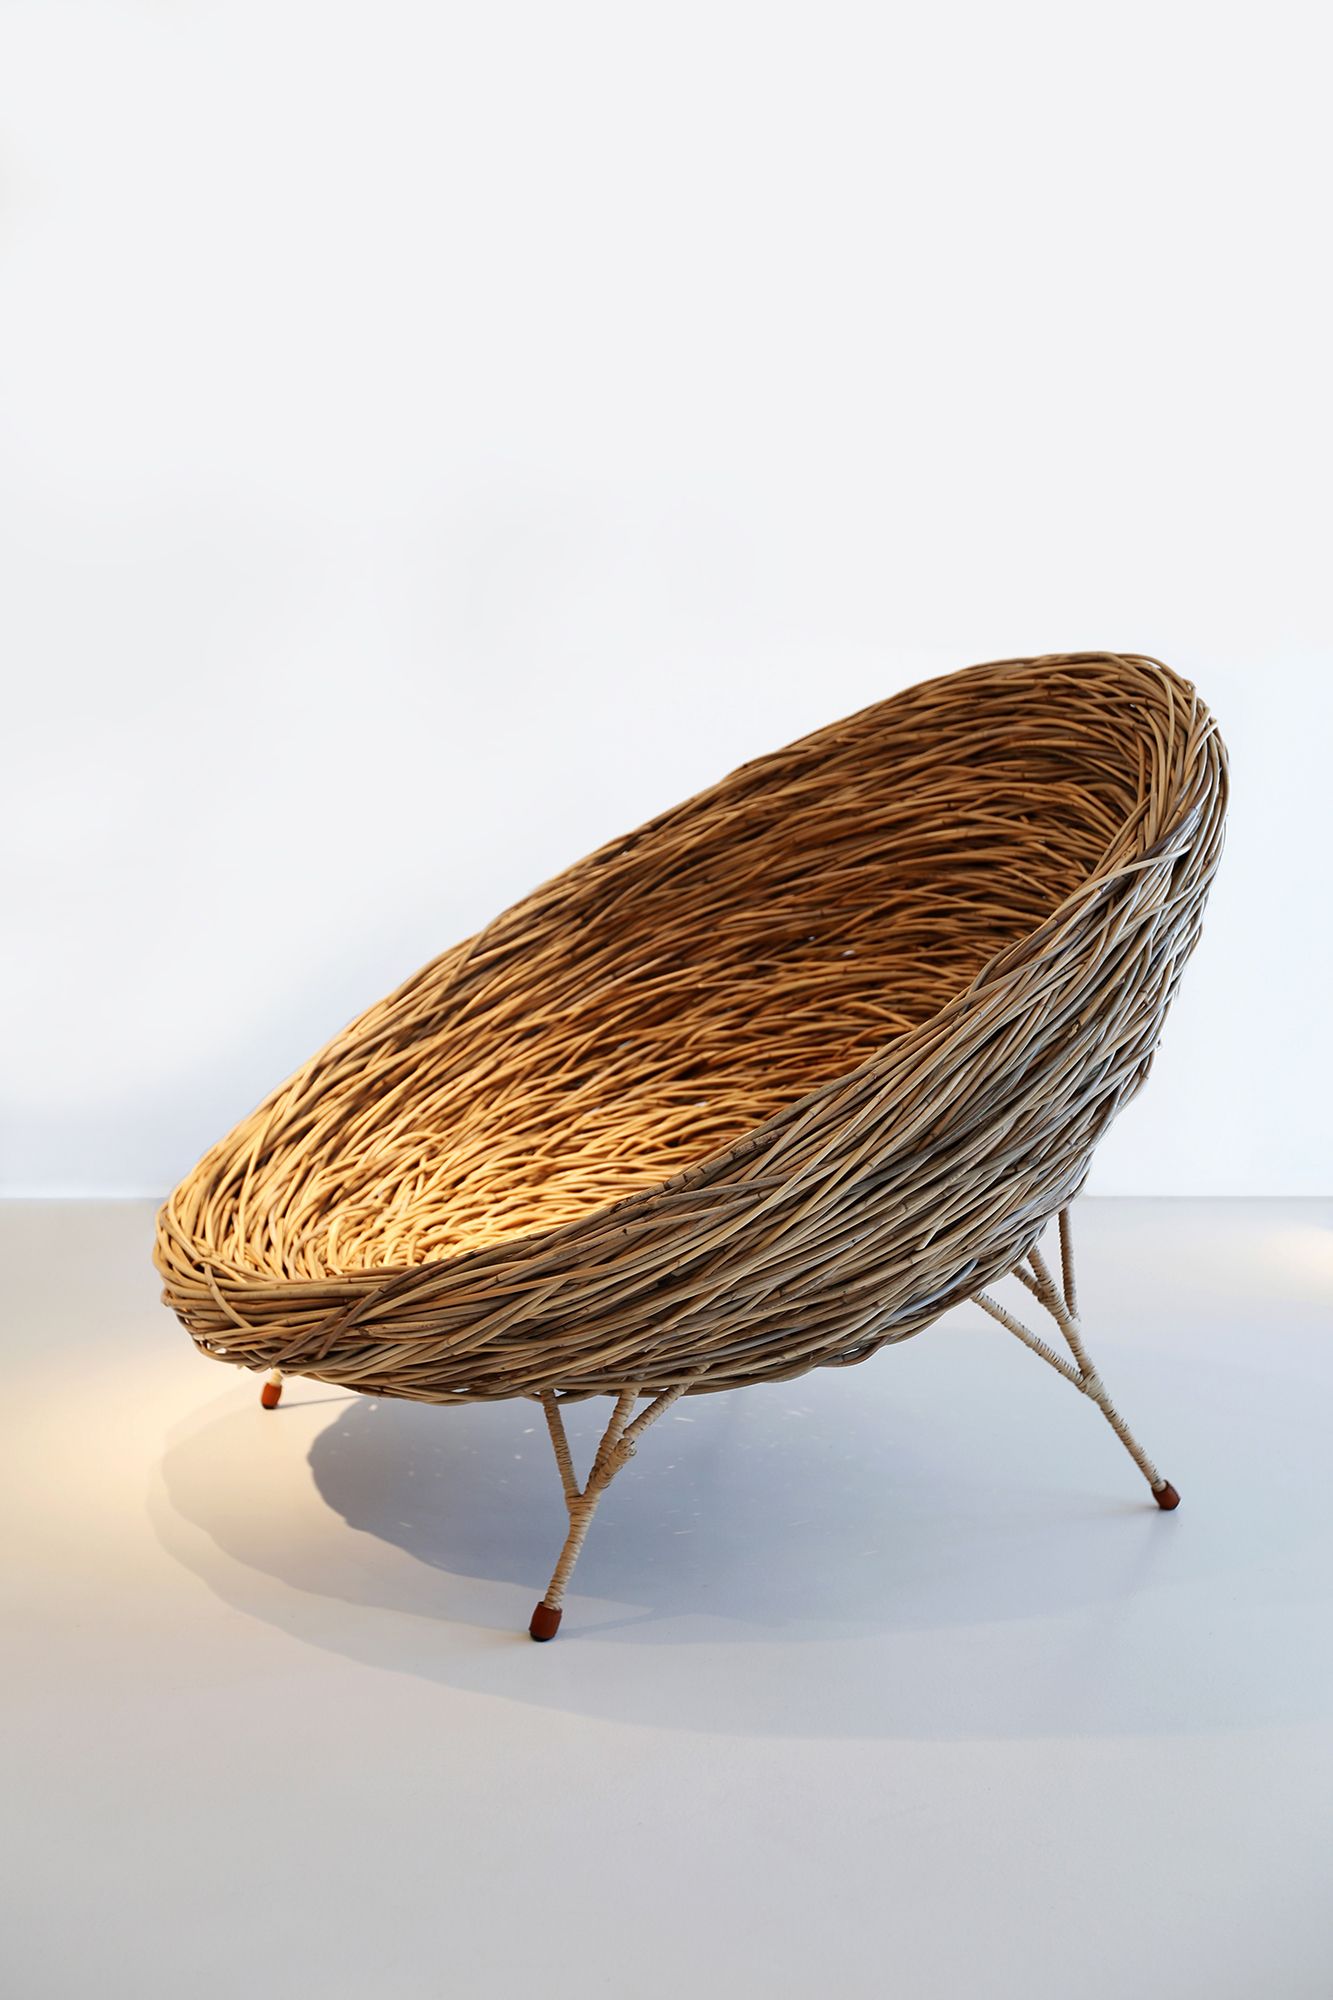 Bamboo Chairs: Add Eco-Friendly Elegance to Your Home with Bamboo Chairs